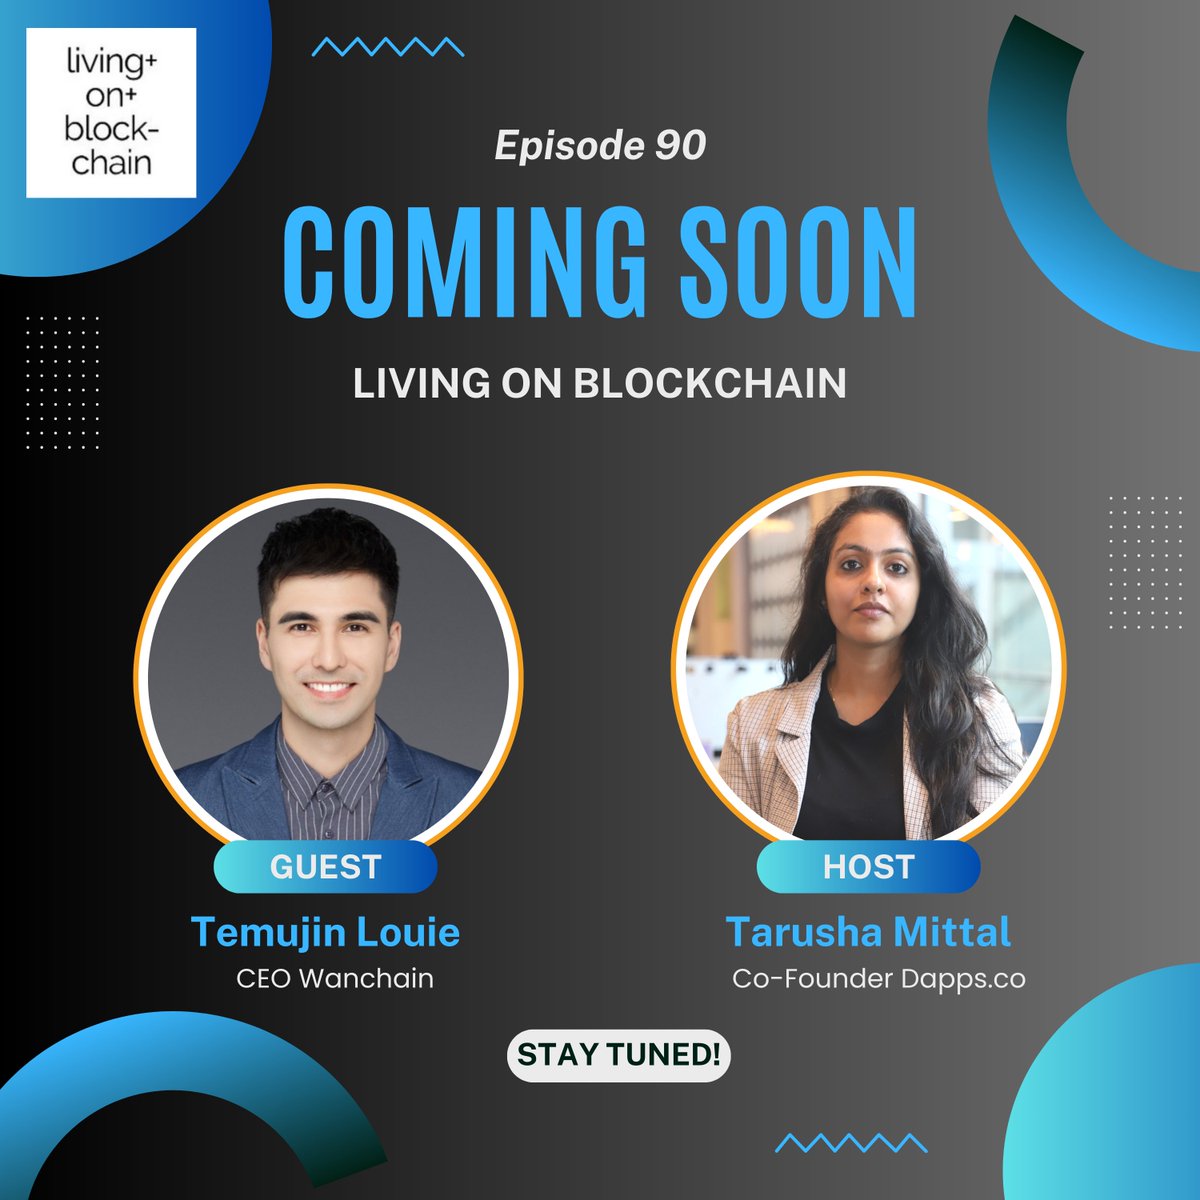 🌟 Exciting news! Our upcoming podcast episode featuring @TemujinLouie, CEO of @wanchain_org, is coming soon🎙️ 🤔 What's the secret behind cross-chain #interoperability and #Web3 that Temujin will reveal? Don't miss out - stay tuned for the episode drop! #Blockchain #podcast